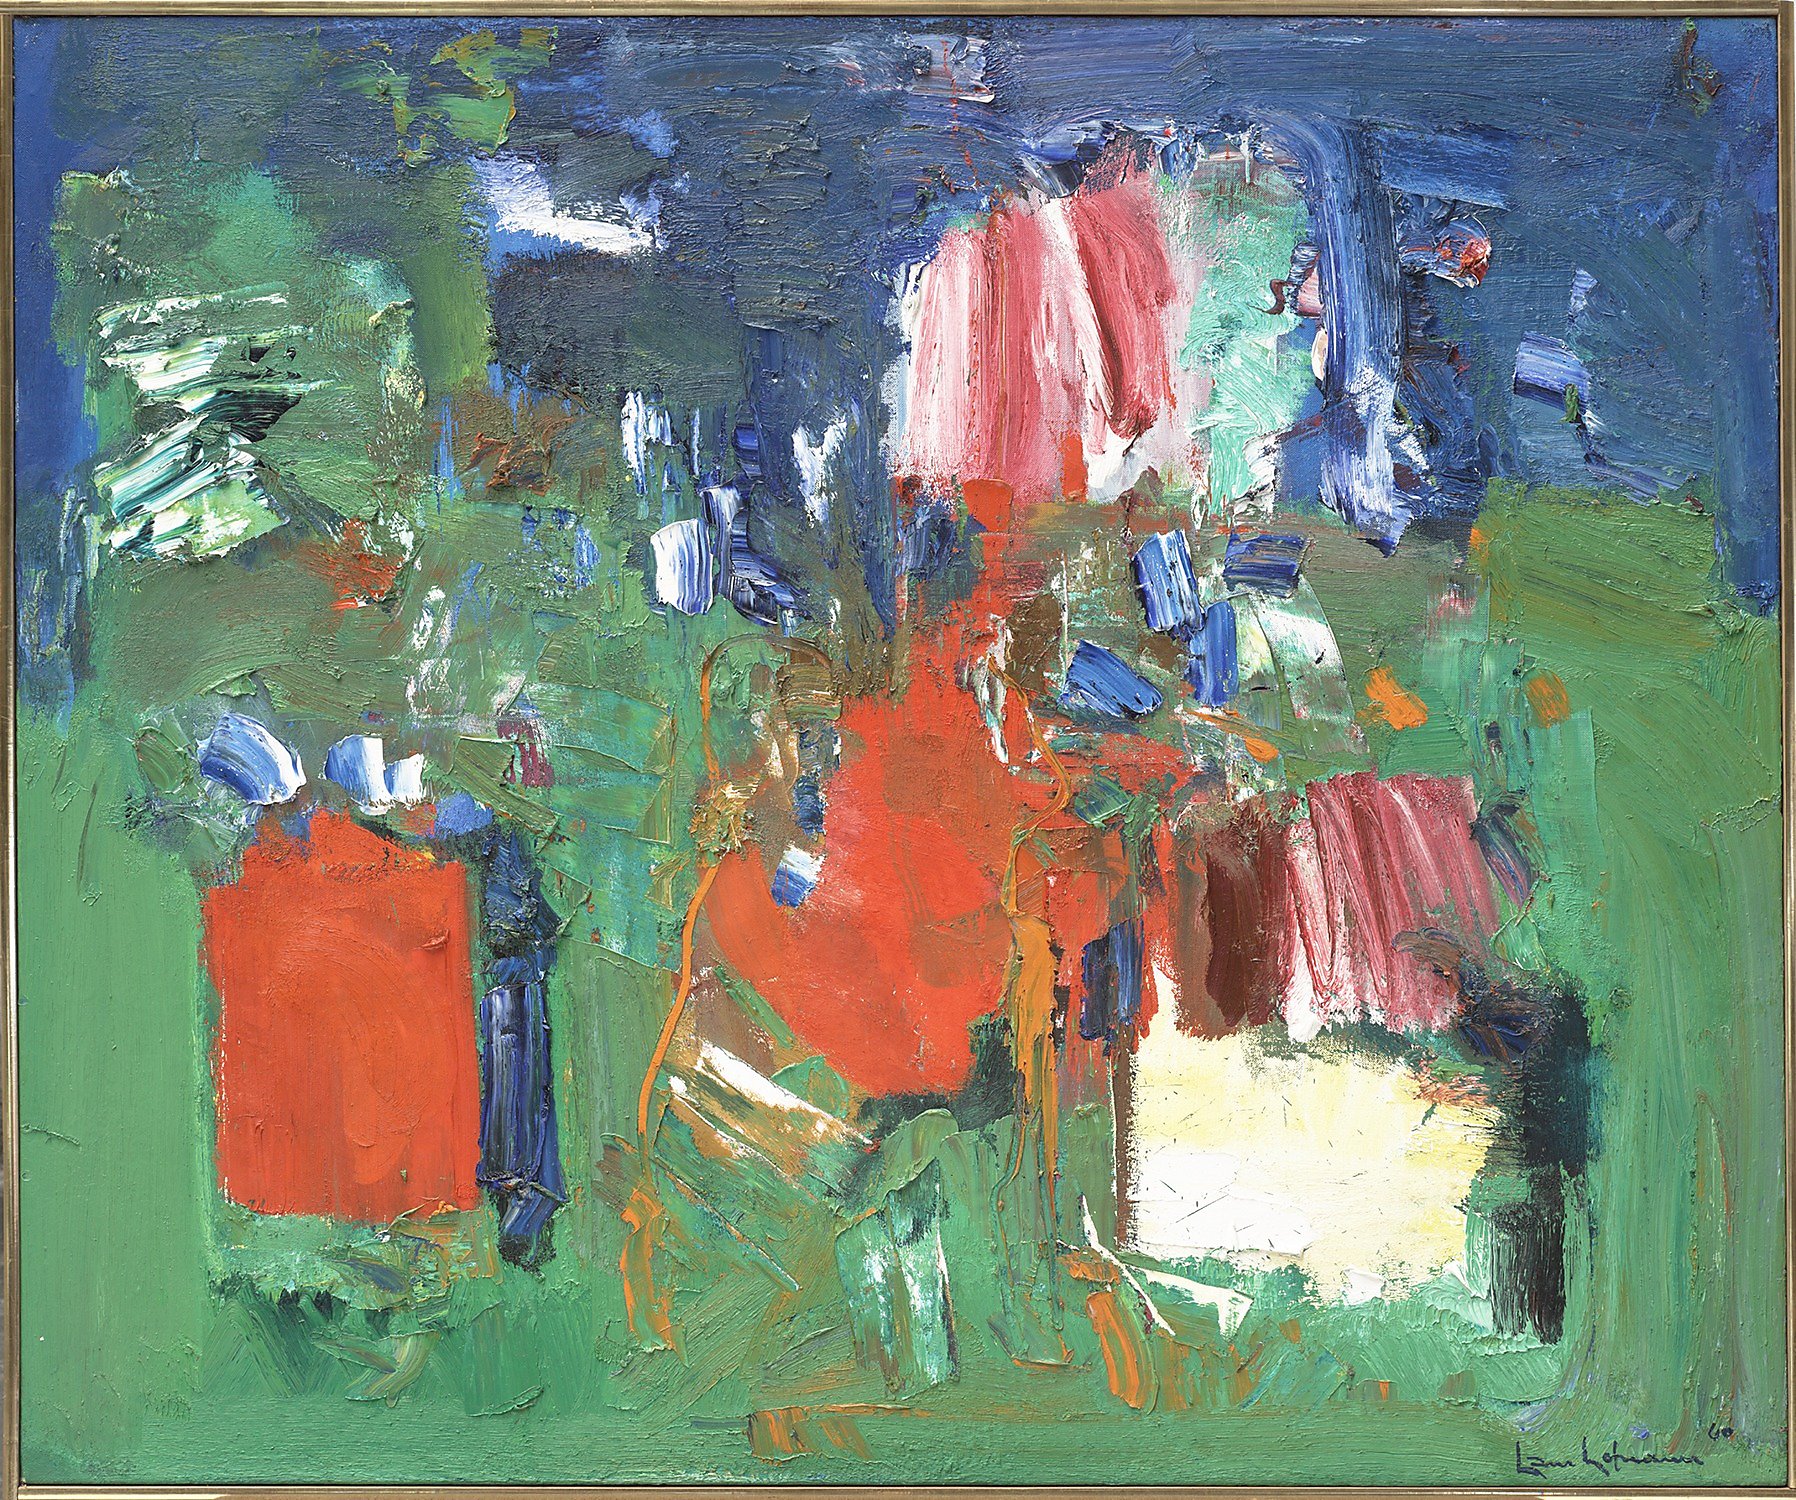 Hans Hofmann: Artist's works to be shown at Cal museum - SFGate